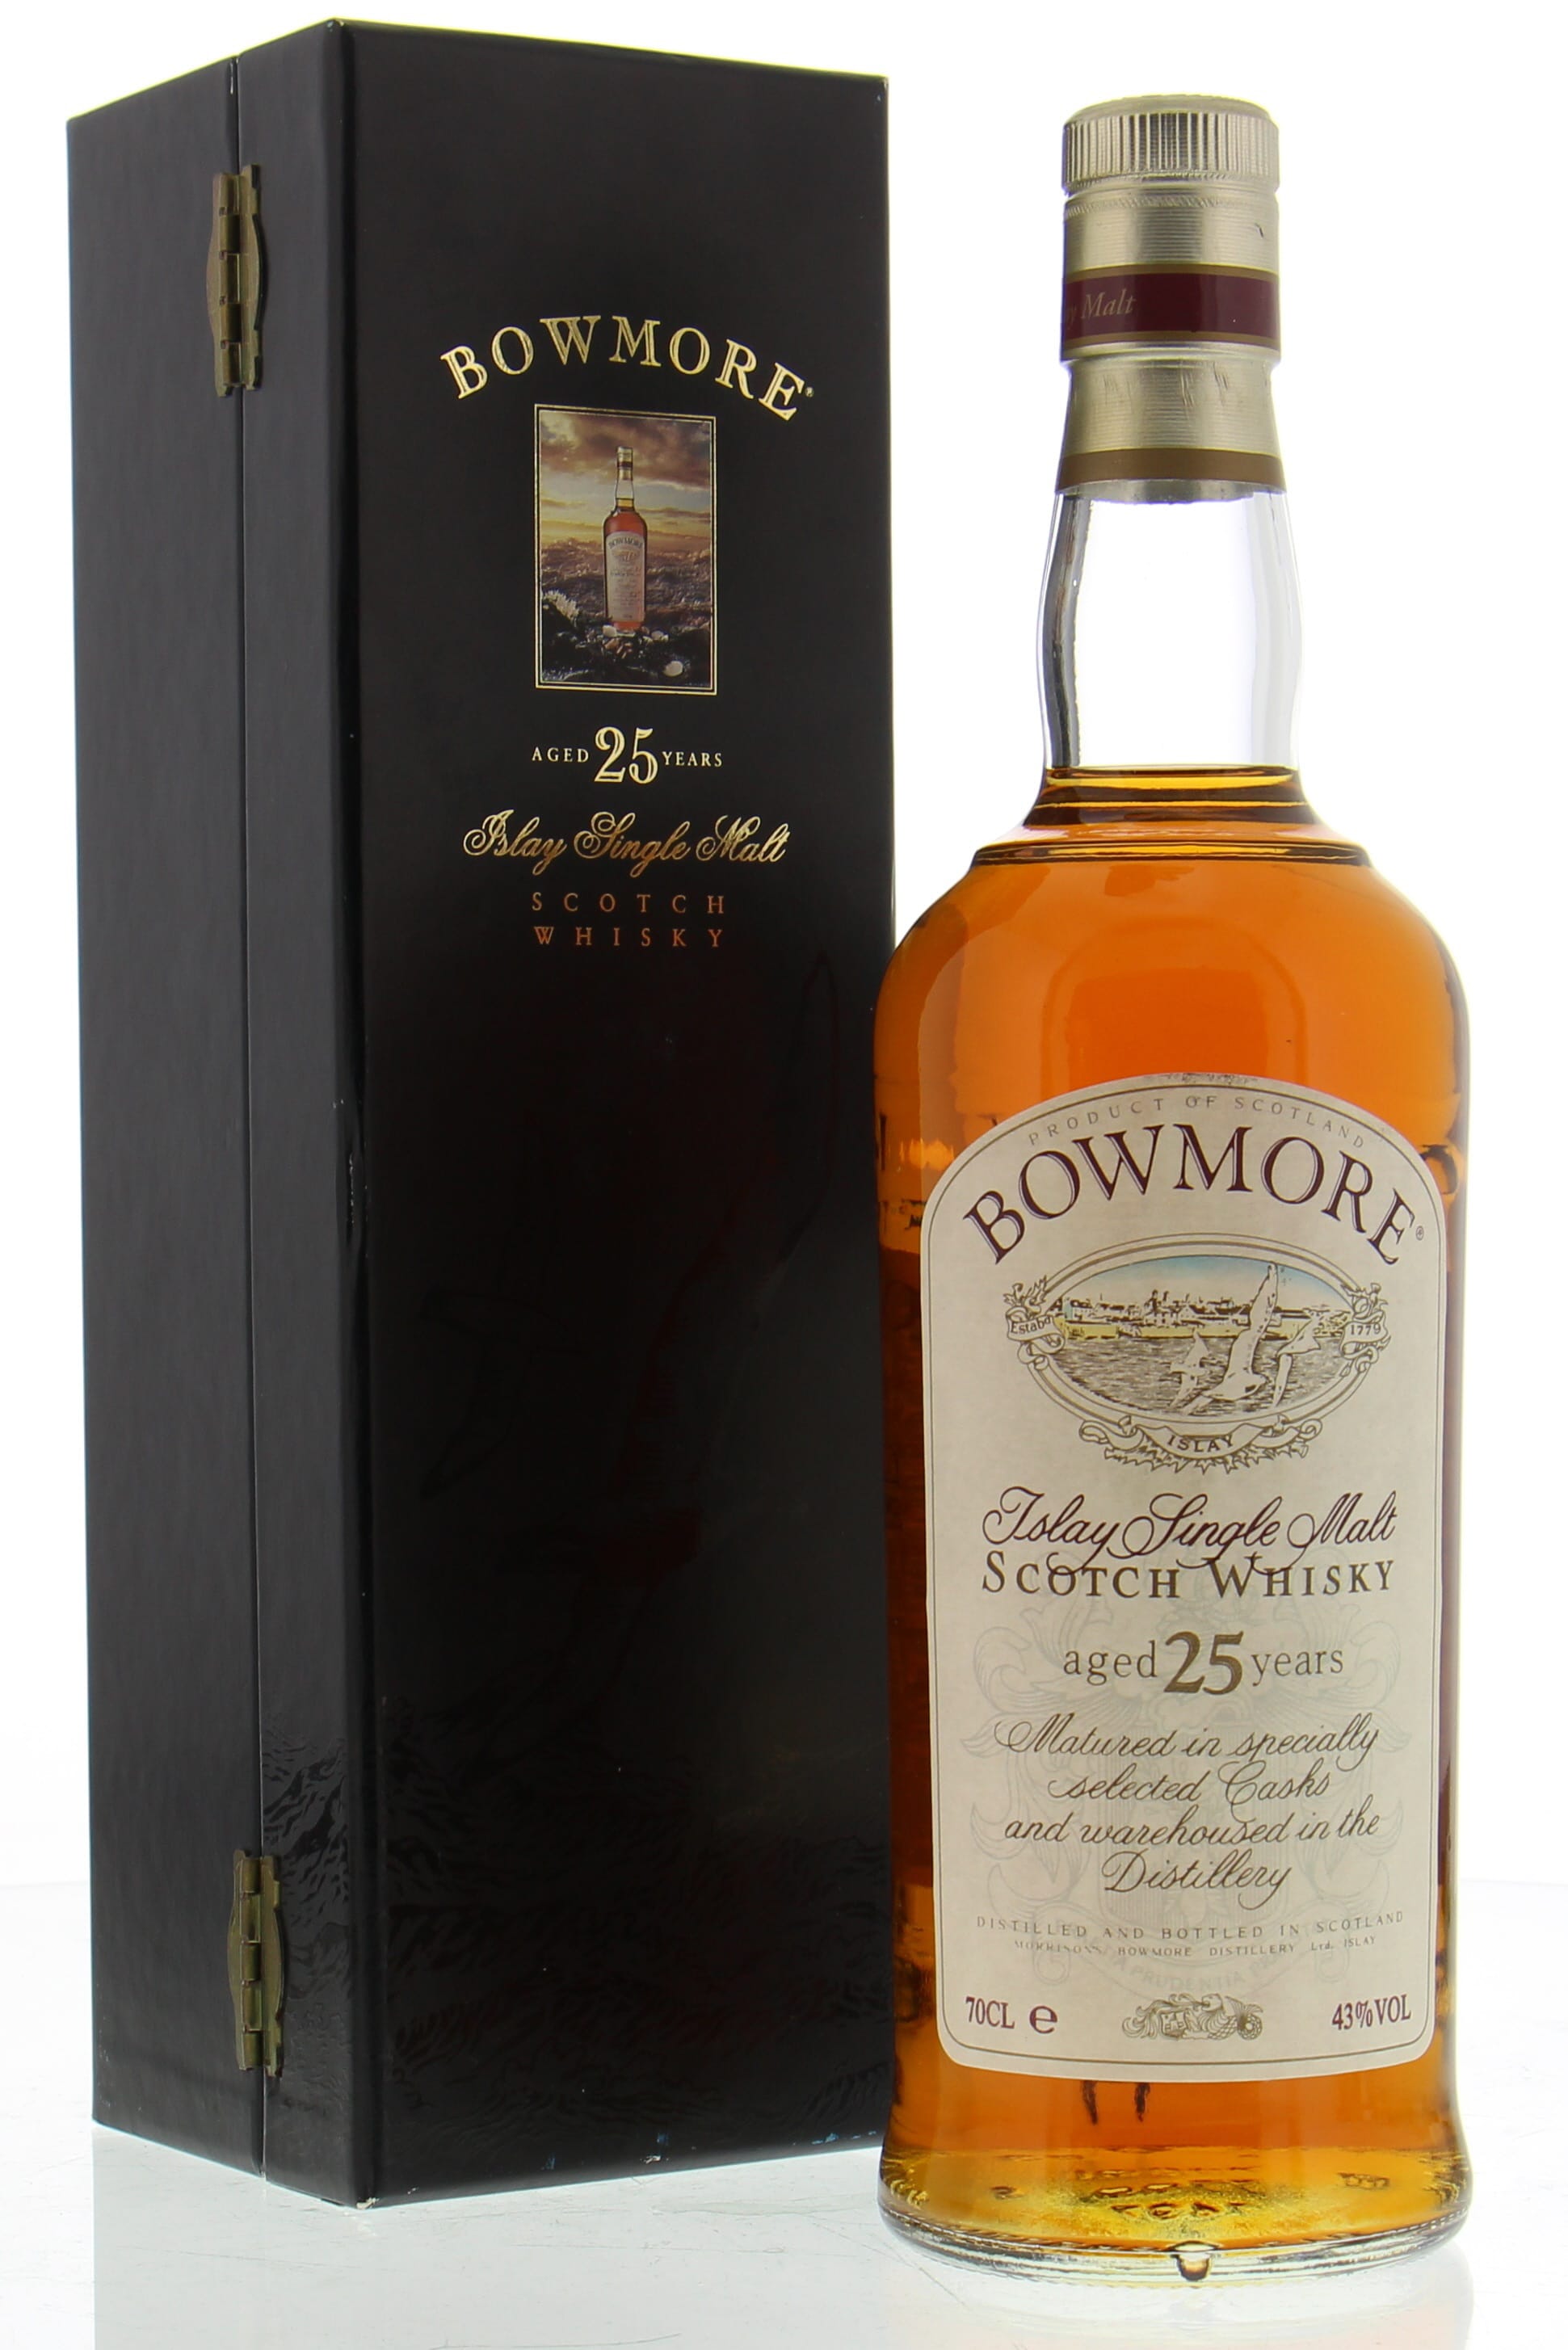 Bowmore - 25 Years Old Seagulls Old label 43% NV